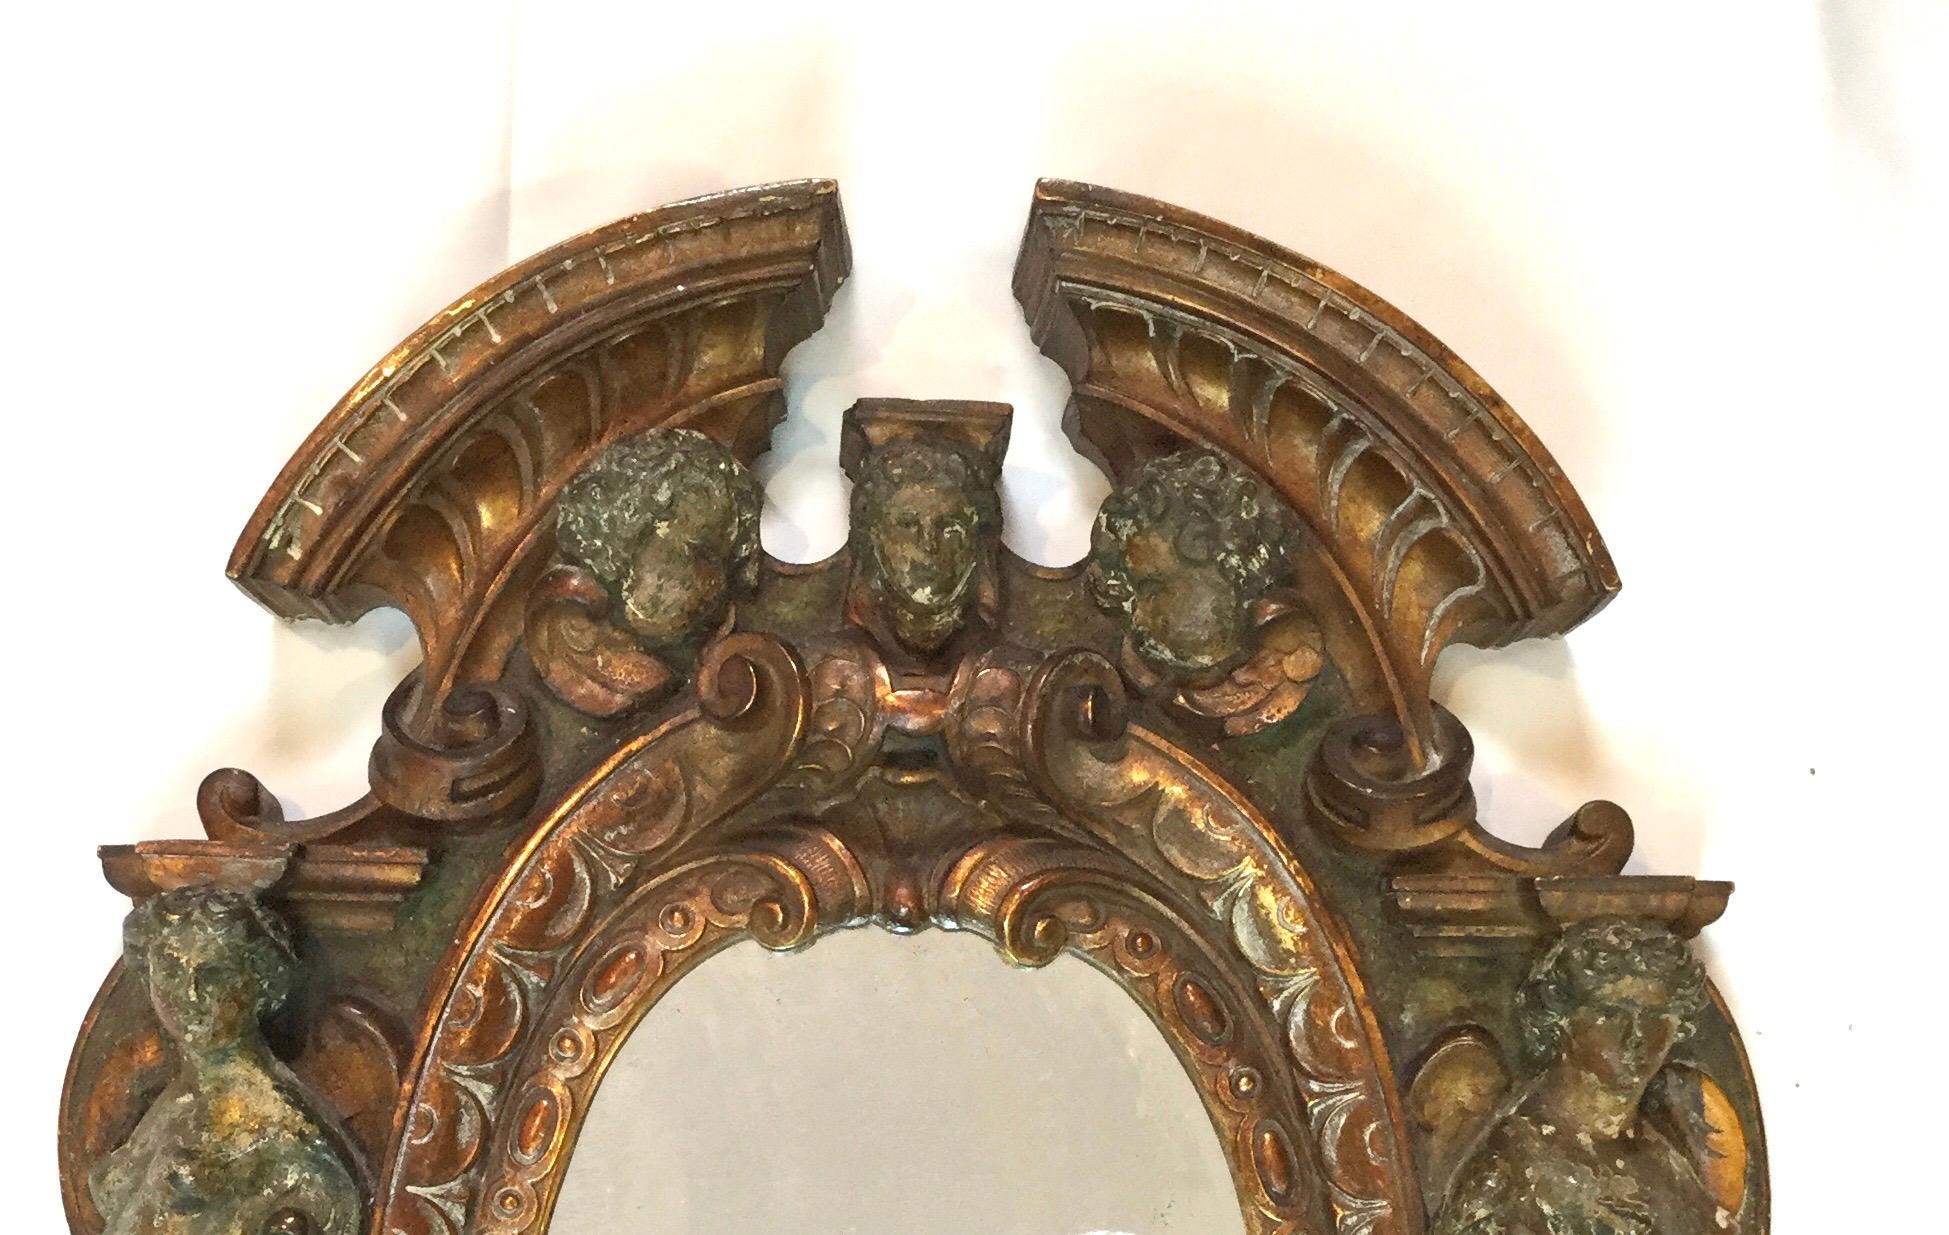 17th-18th century mixed metal Italian Renaissance mirror, made in Tuscan Italy
Exceptional figural Renaissance antique mirror which is very hard to find from that time period. Bronze frame has an old weathered pained finish. The silvering on the